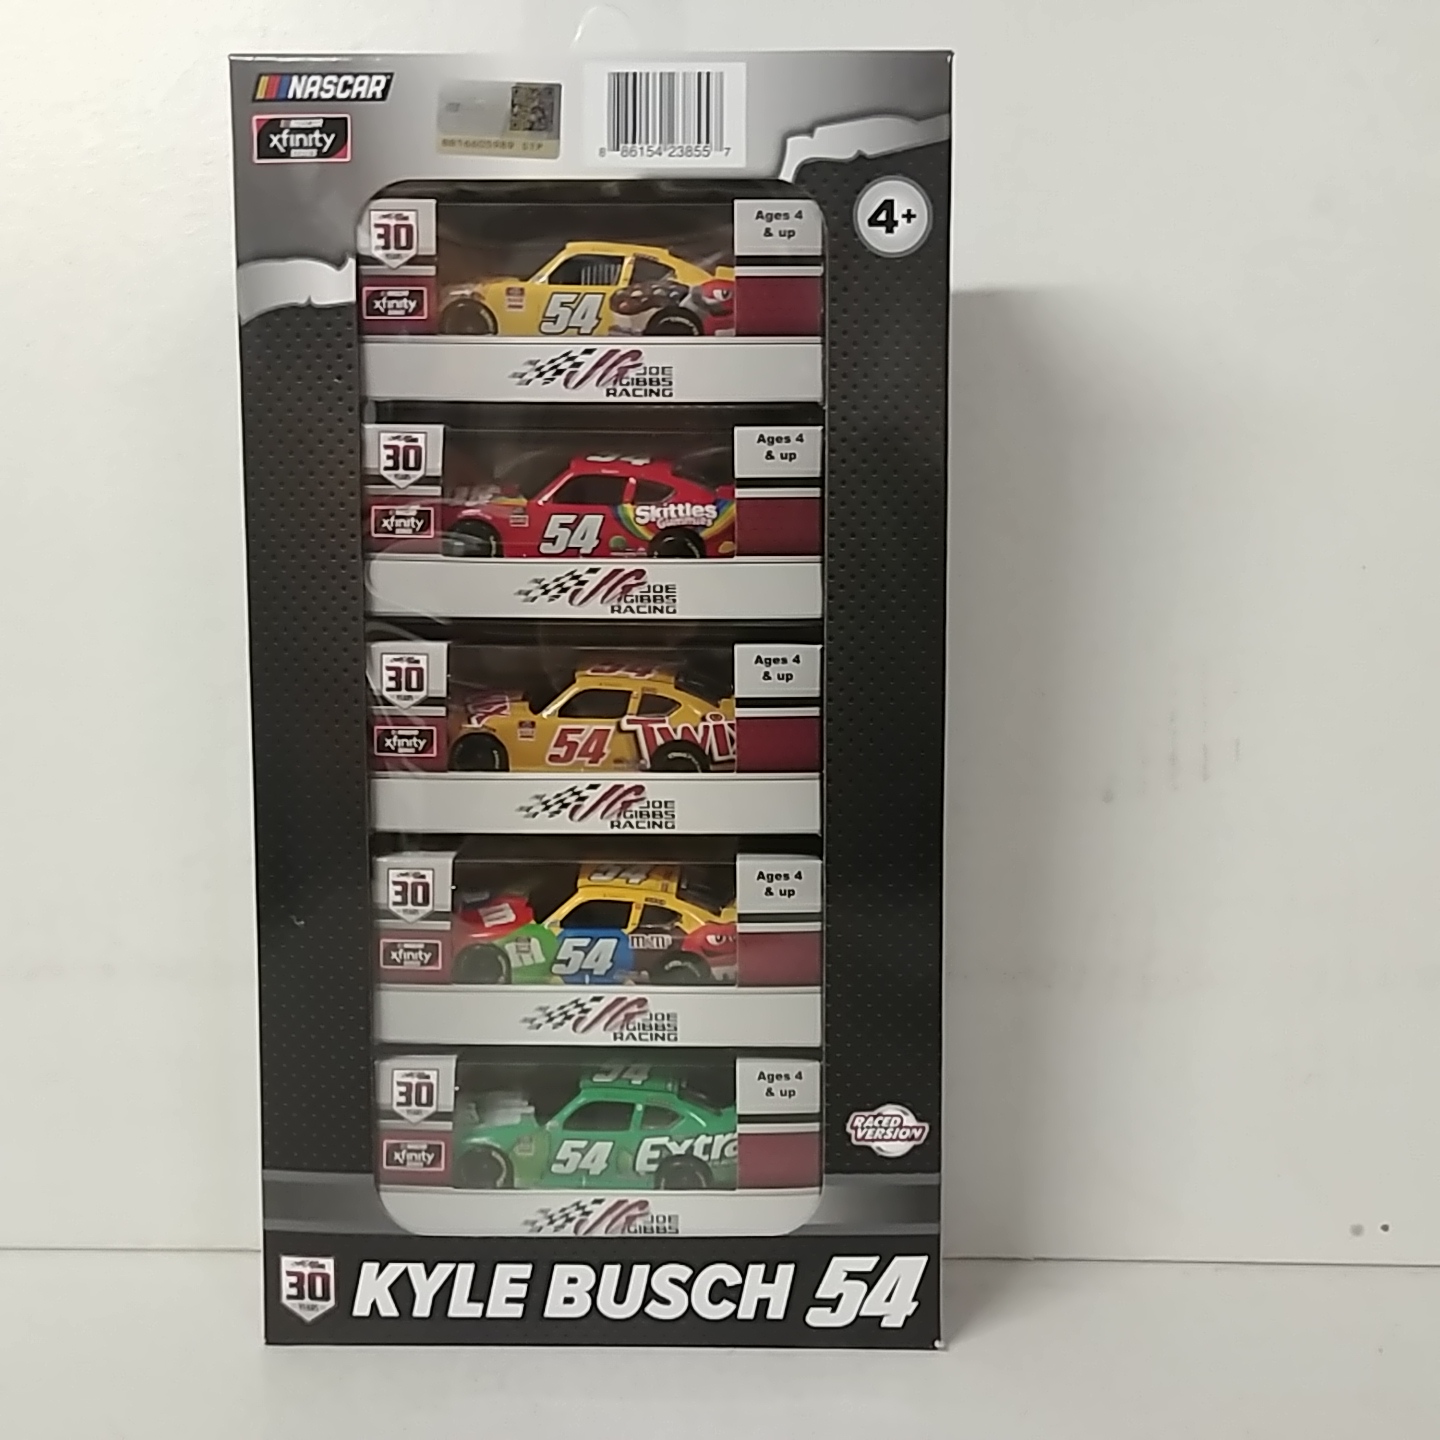 2021 Kyle Busch 1/64th Five Win "Xfinity Series" Sweep Set